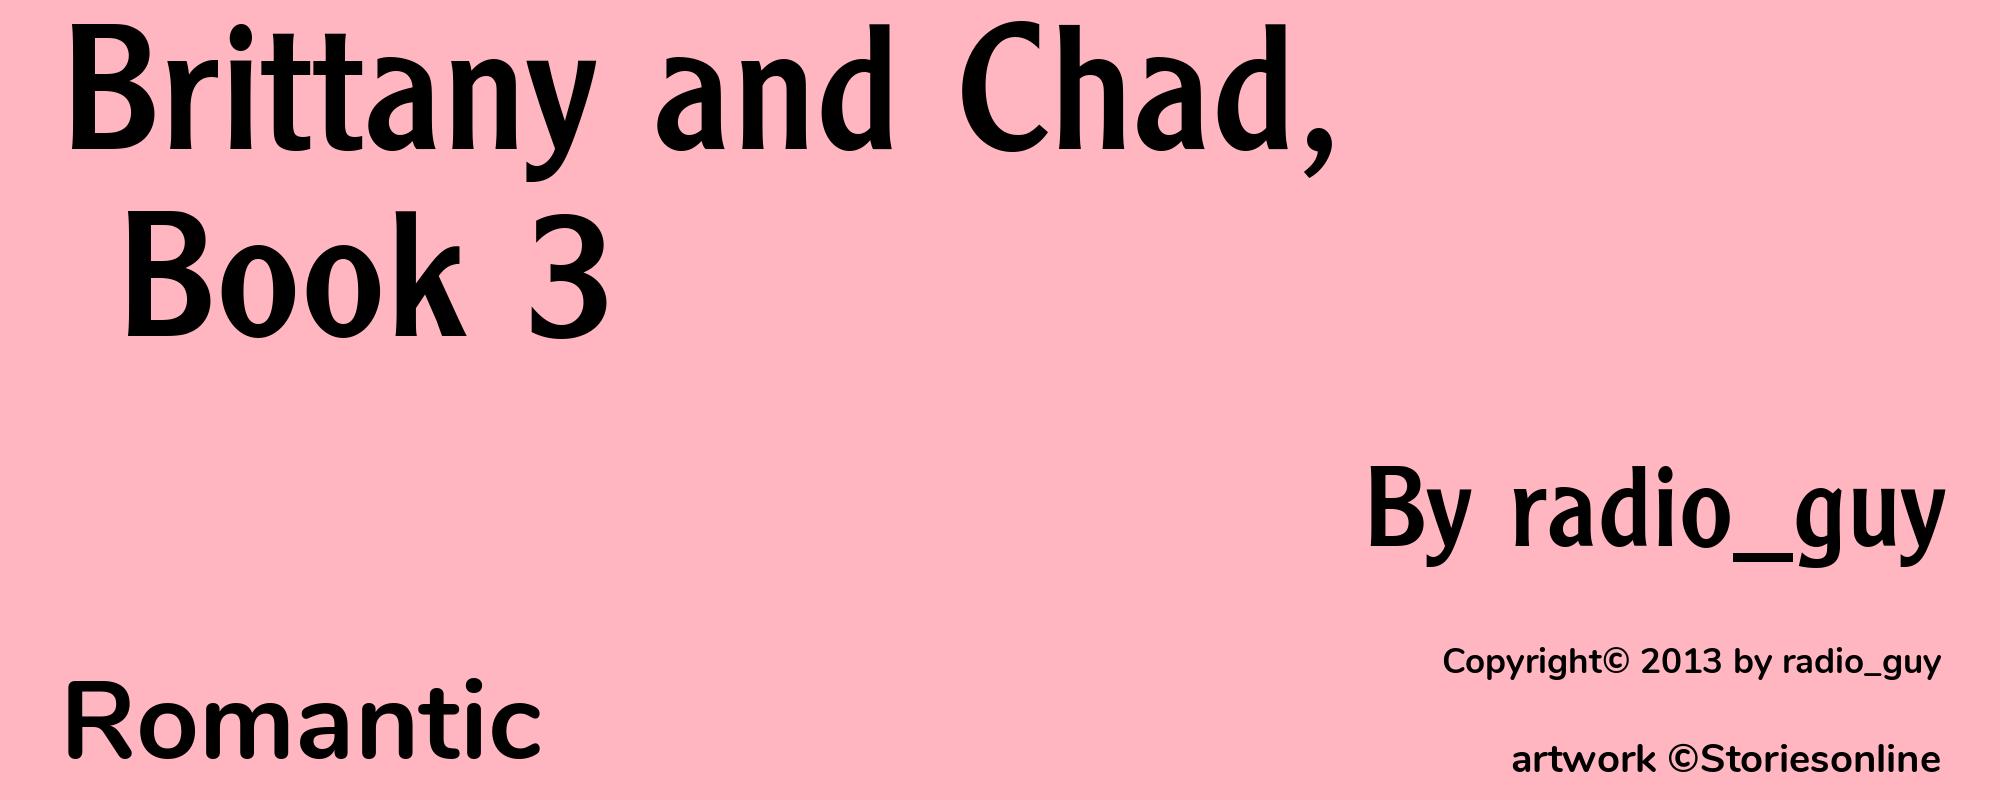 Brittany and Chad, Book 3 - Cover